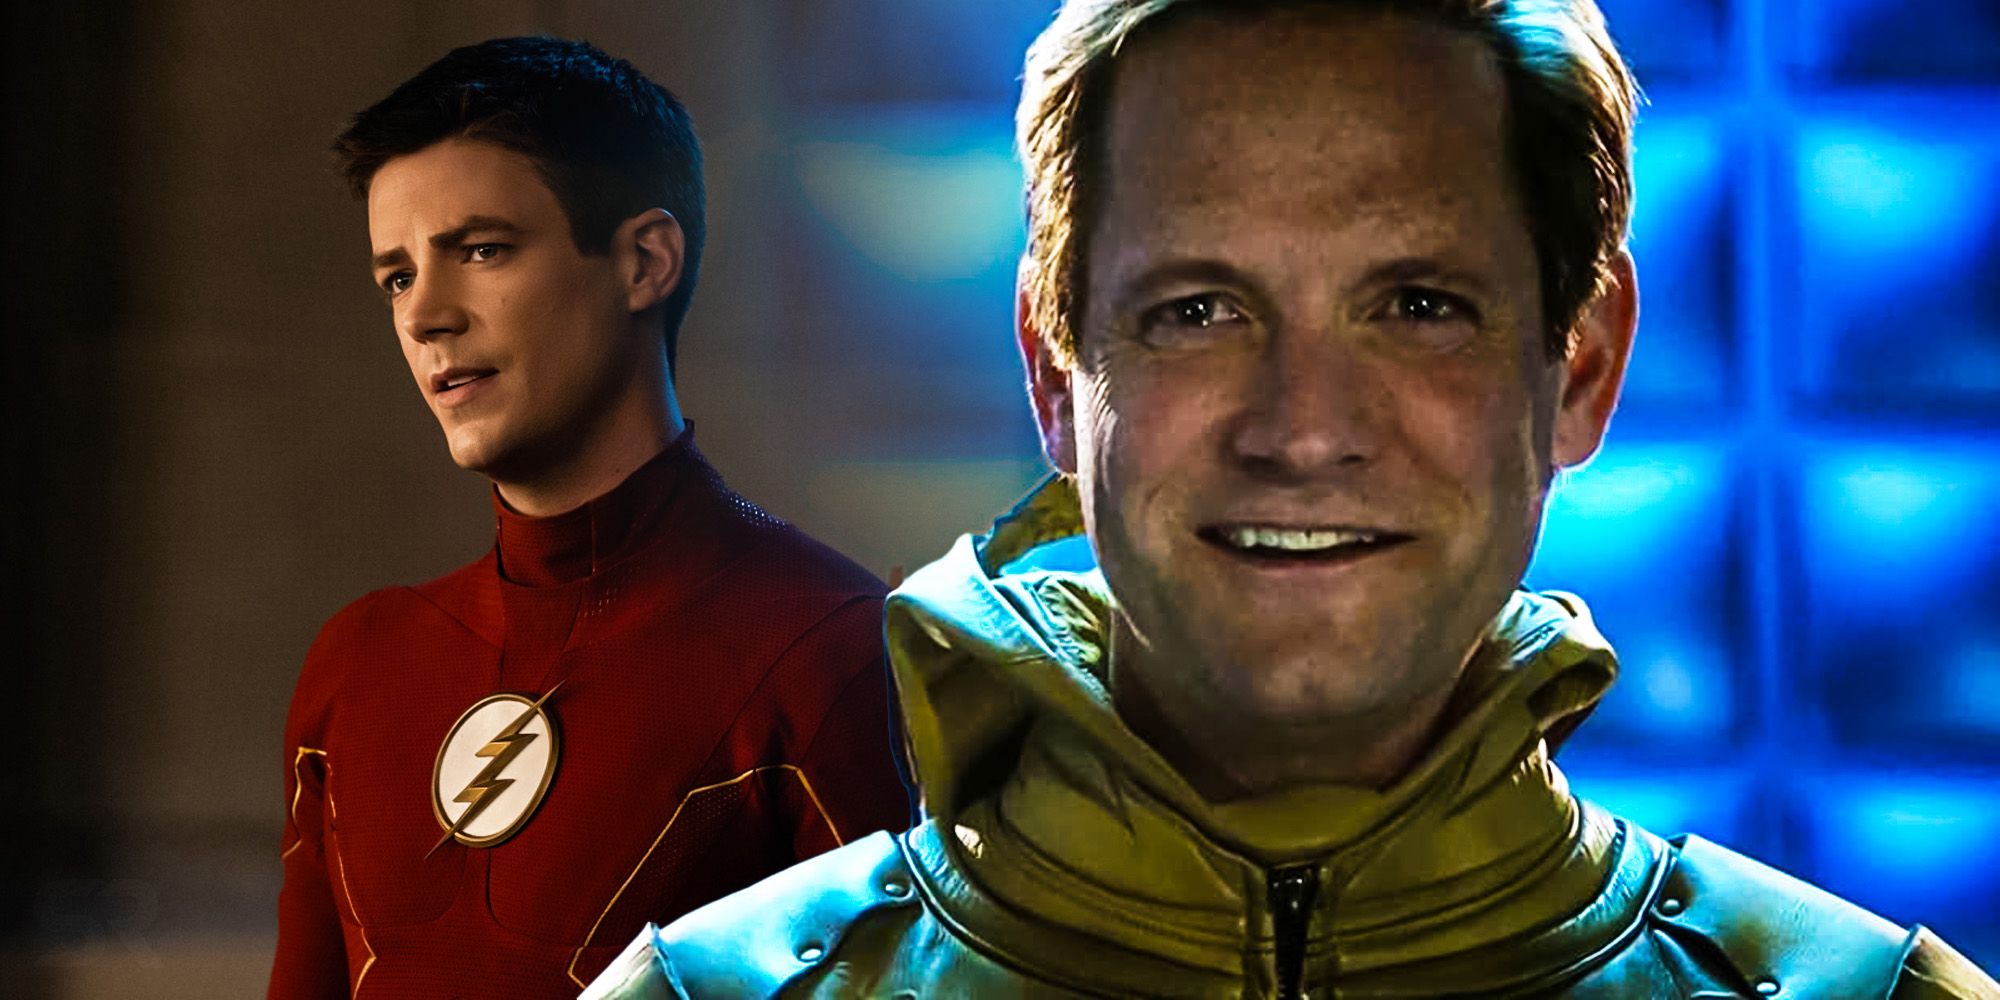 A split screen of Flash and Reverse Flash.